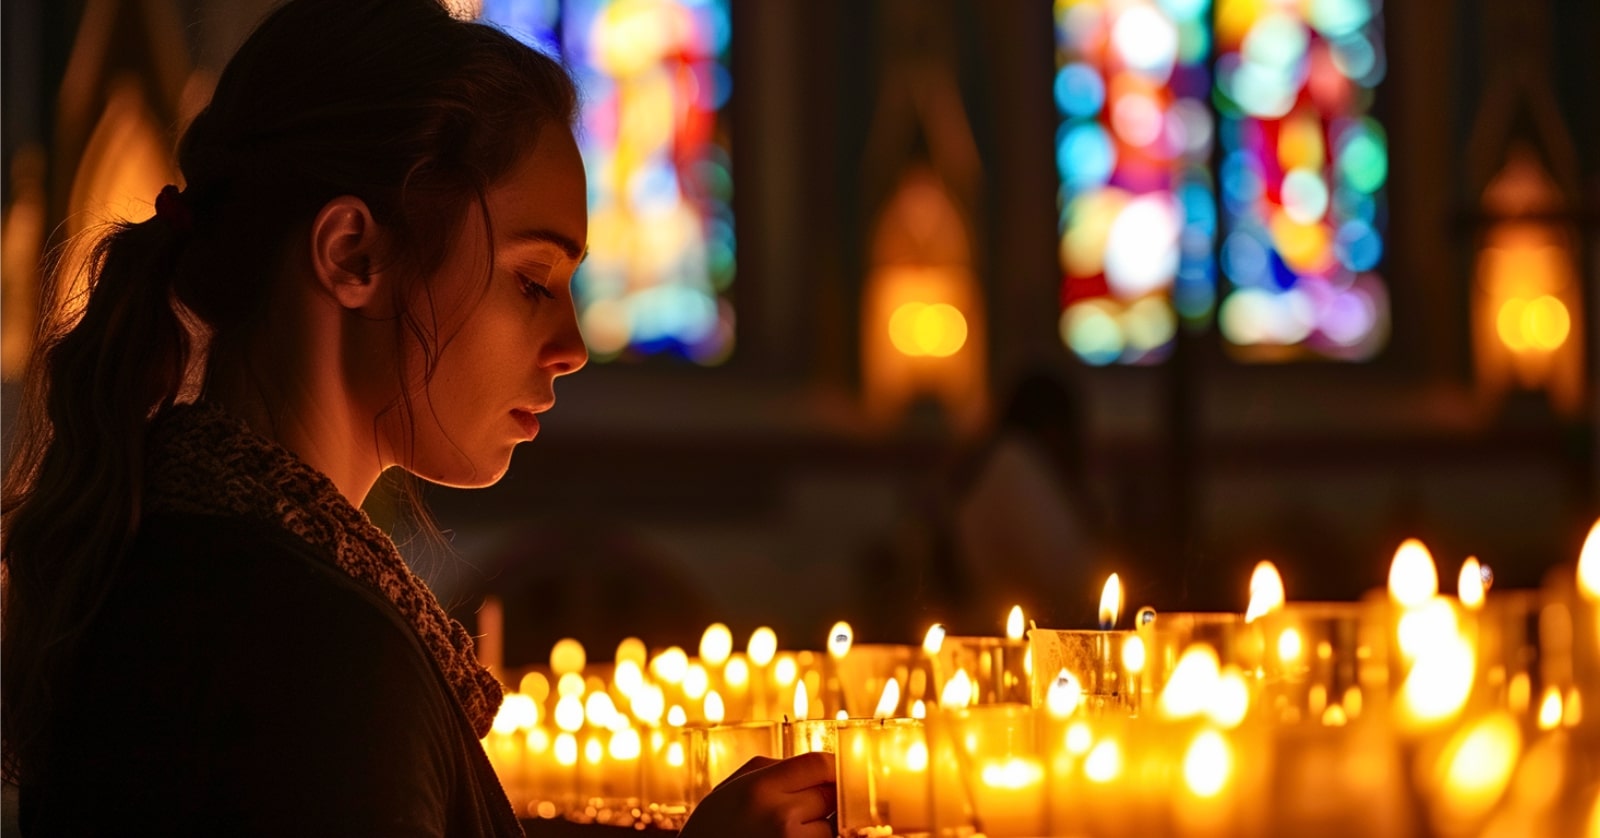 young woman lighting a candle of remembrance in at a church altar covered in other candles in a dimly lit scene